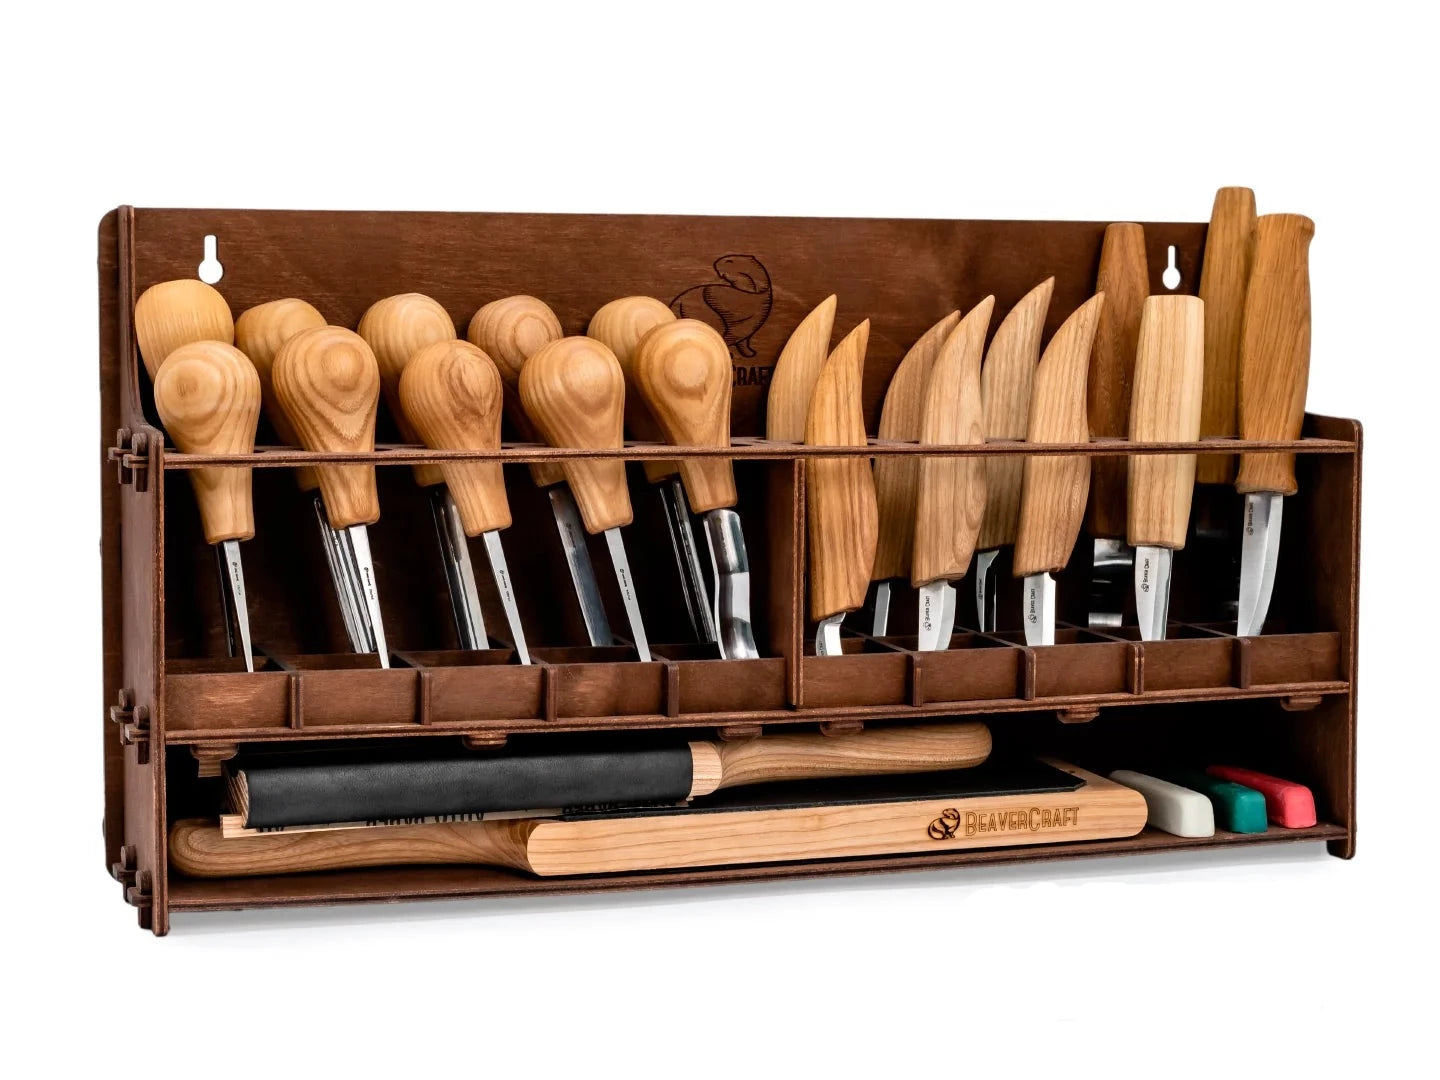 Buy S57L - Large left-handed Wood Carving Tool Set with 20 Tools